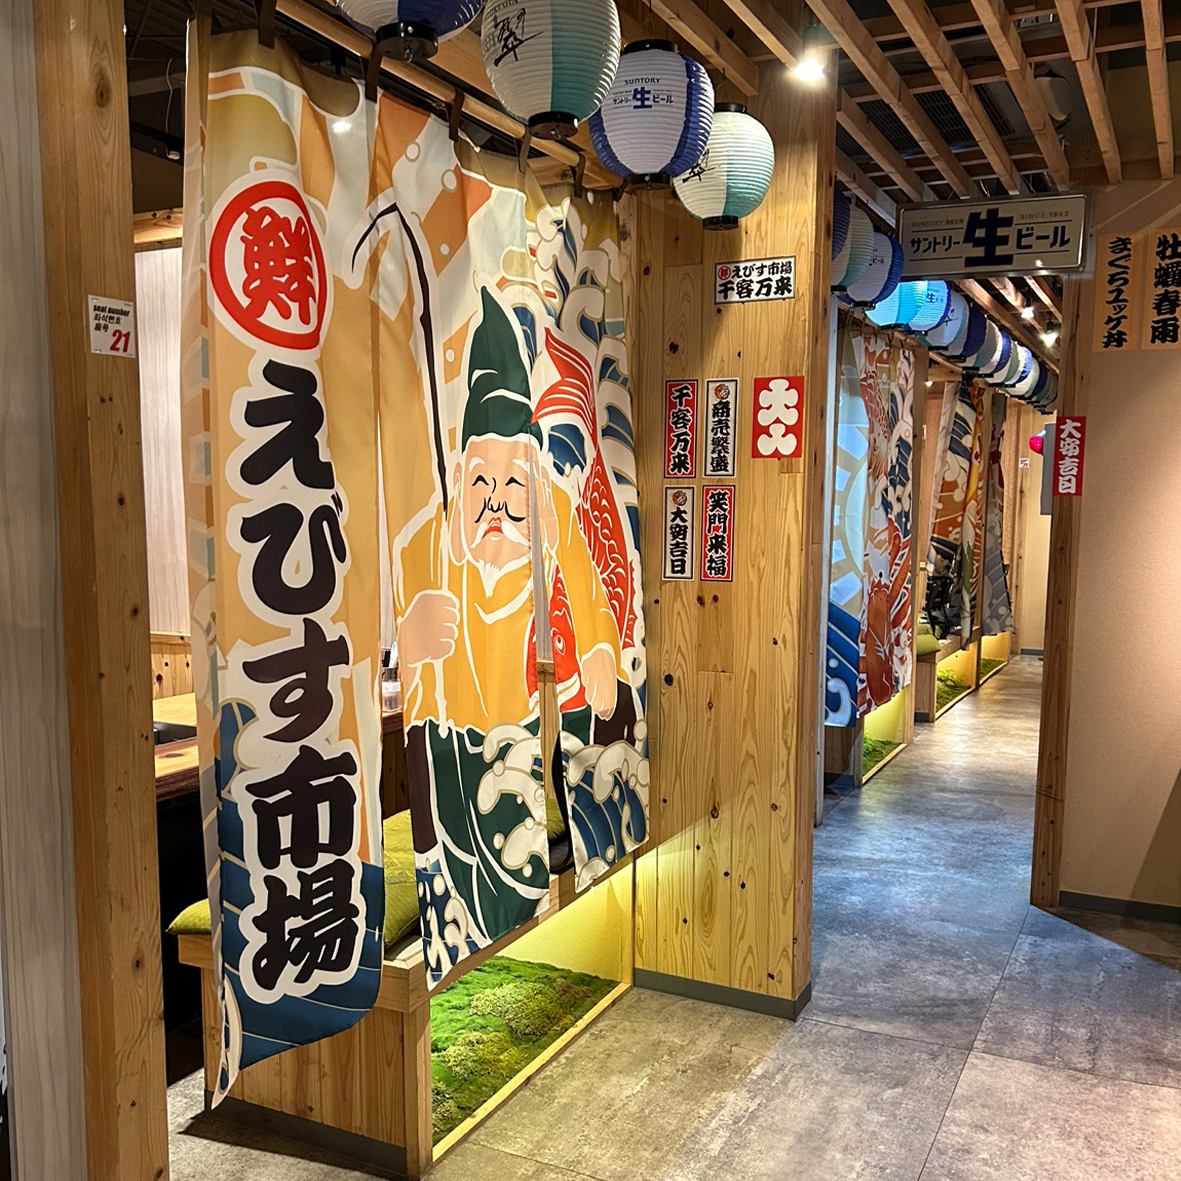 For lunch, head to Ebisu Market! Fresh seafood and draft beer go great together!